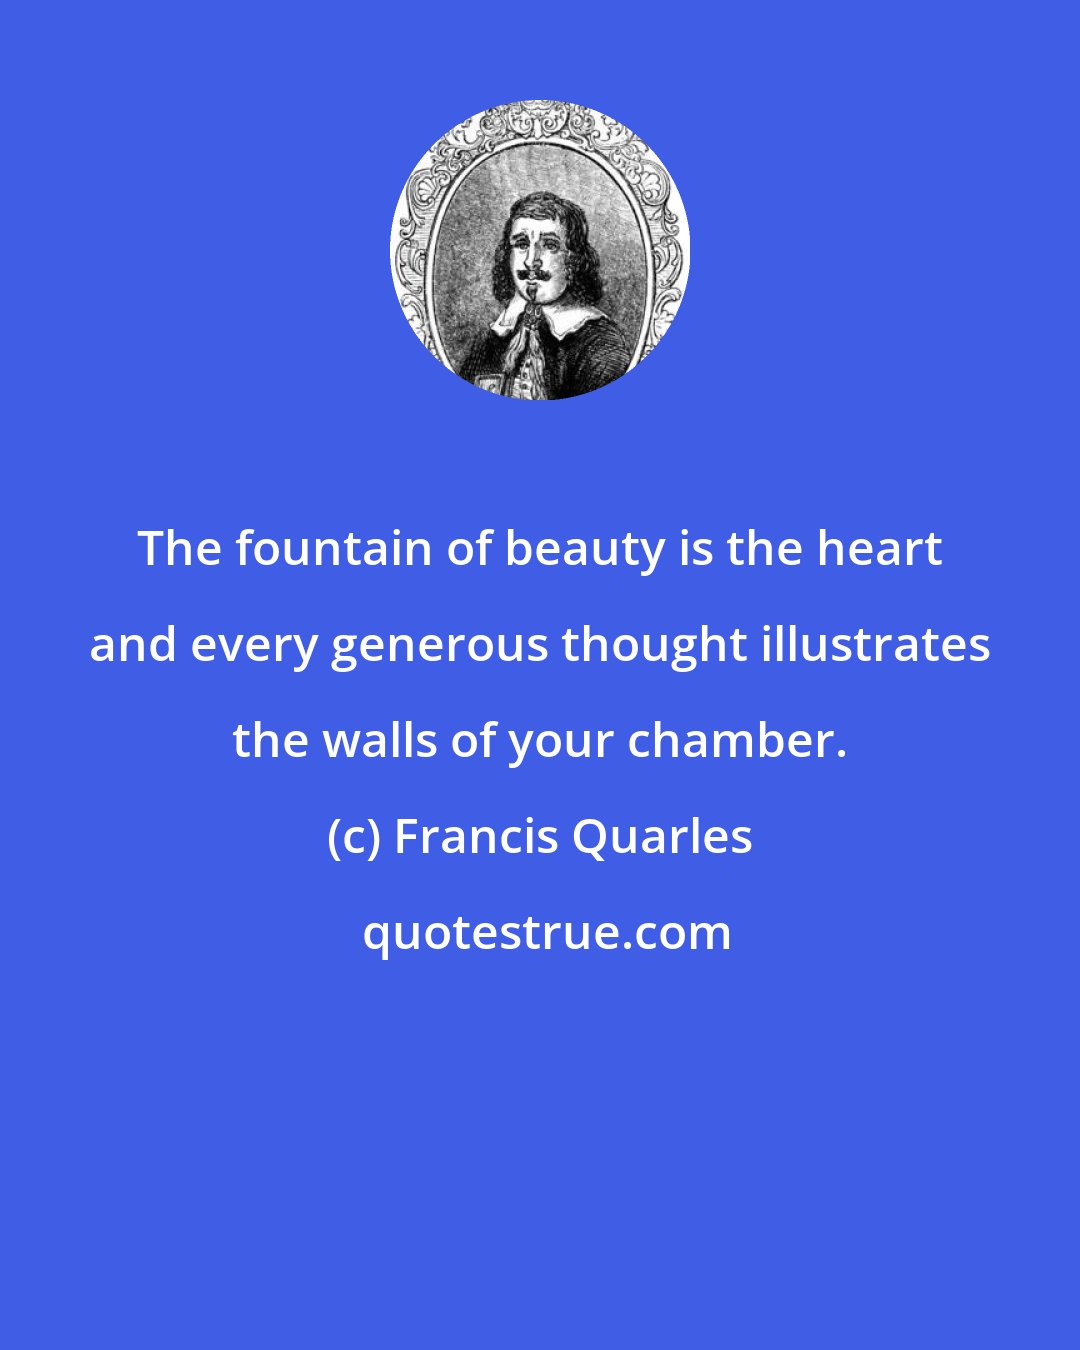 Francis Quarles: The fountain of beauty is the heart and every generous thought illustrates the walls of your chamber.